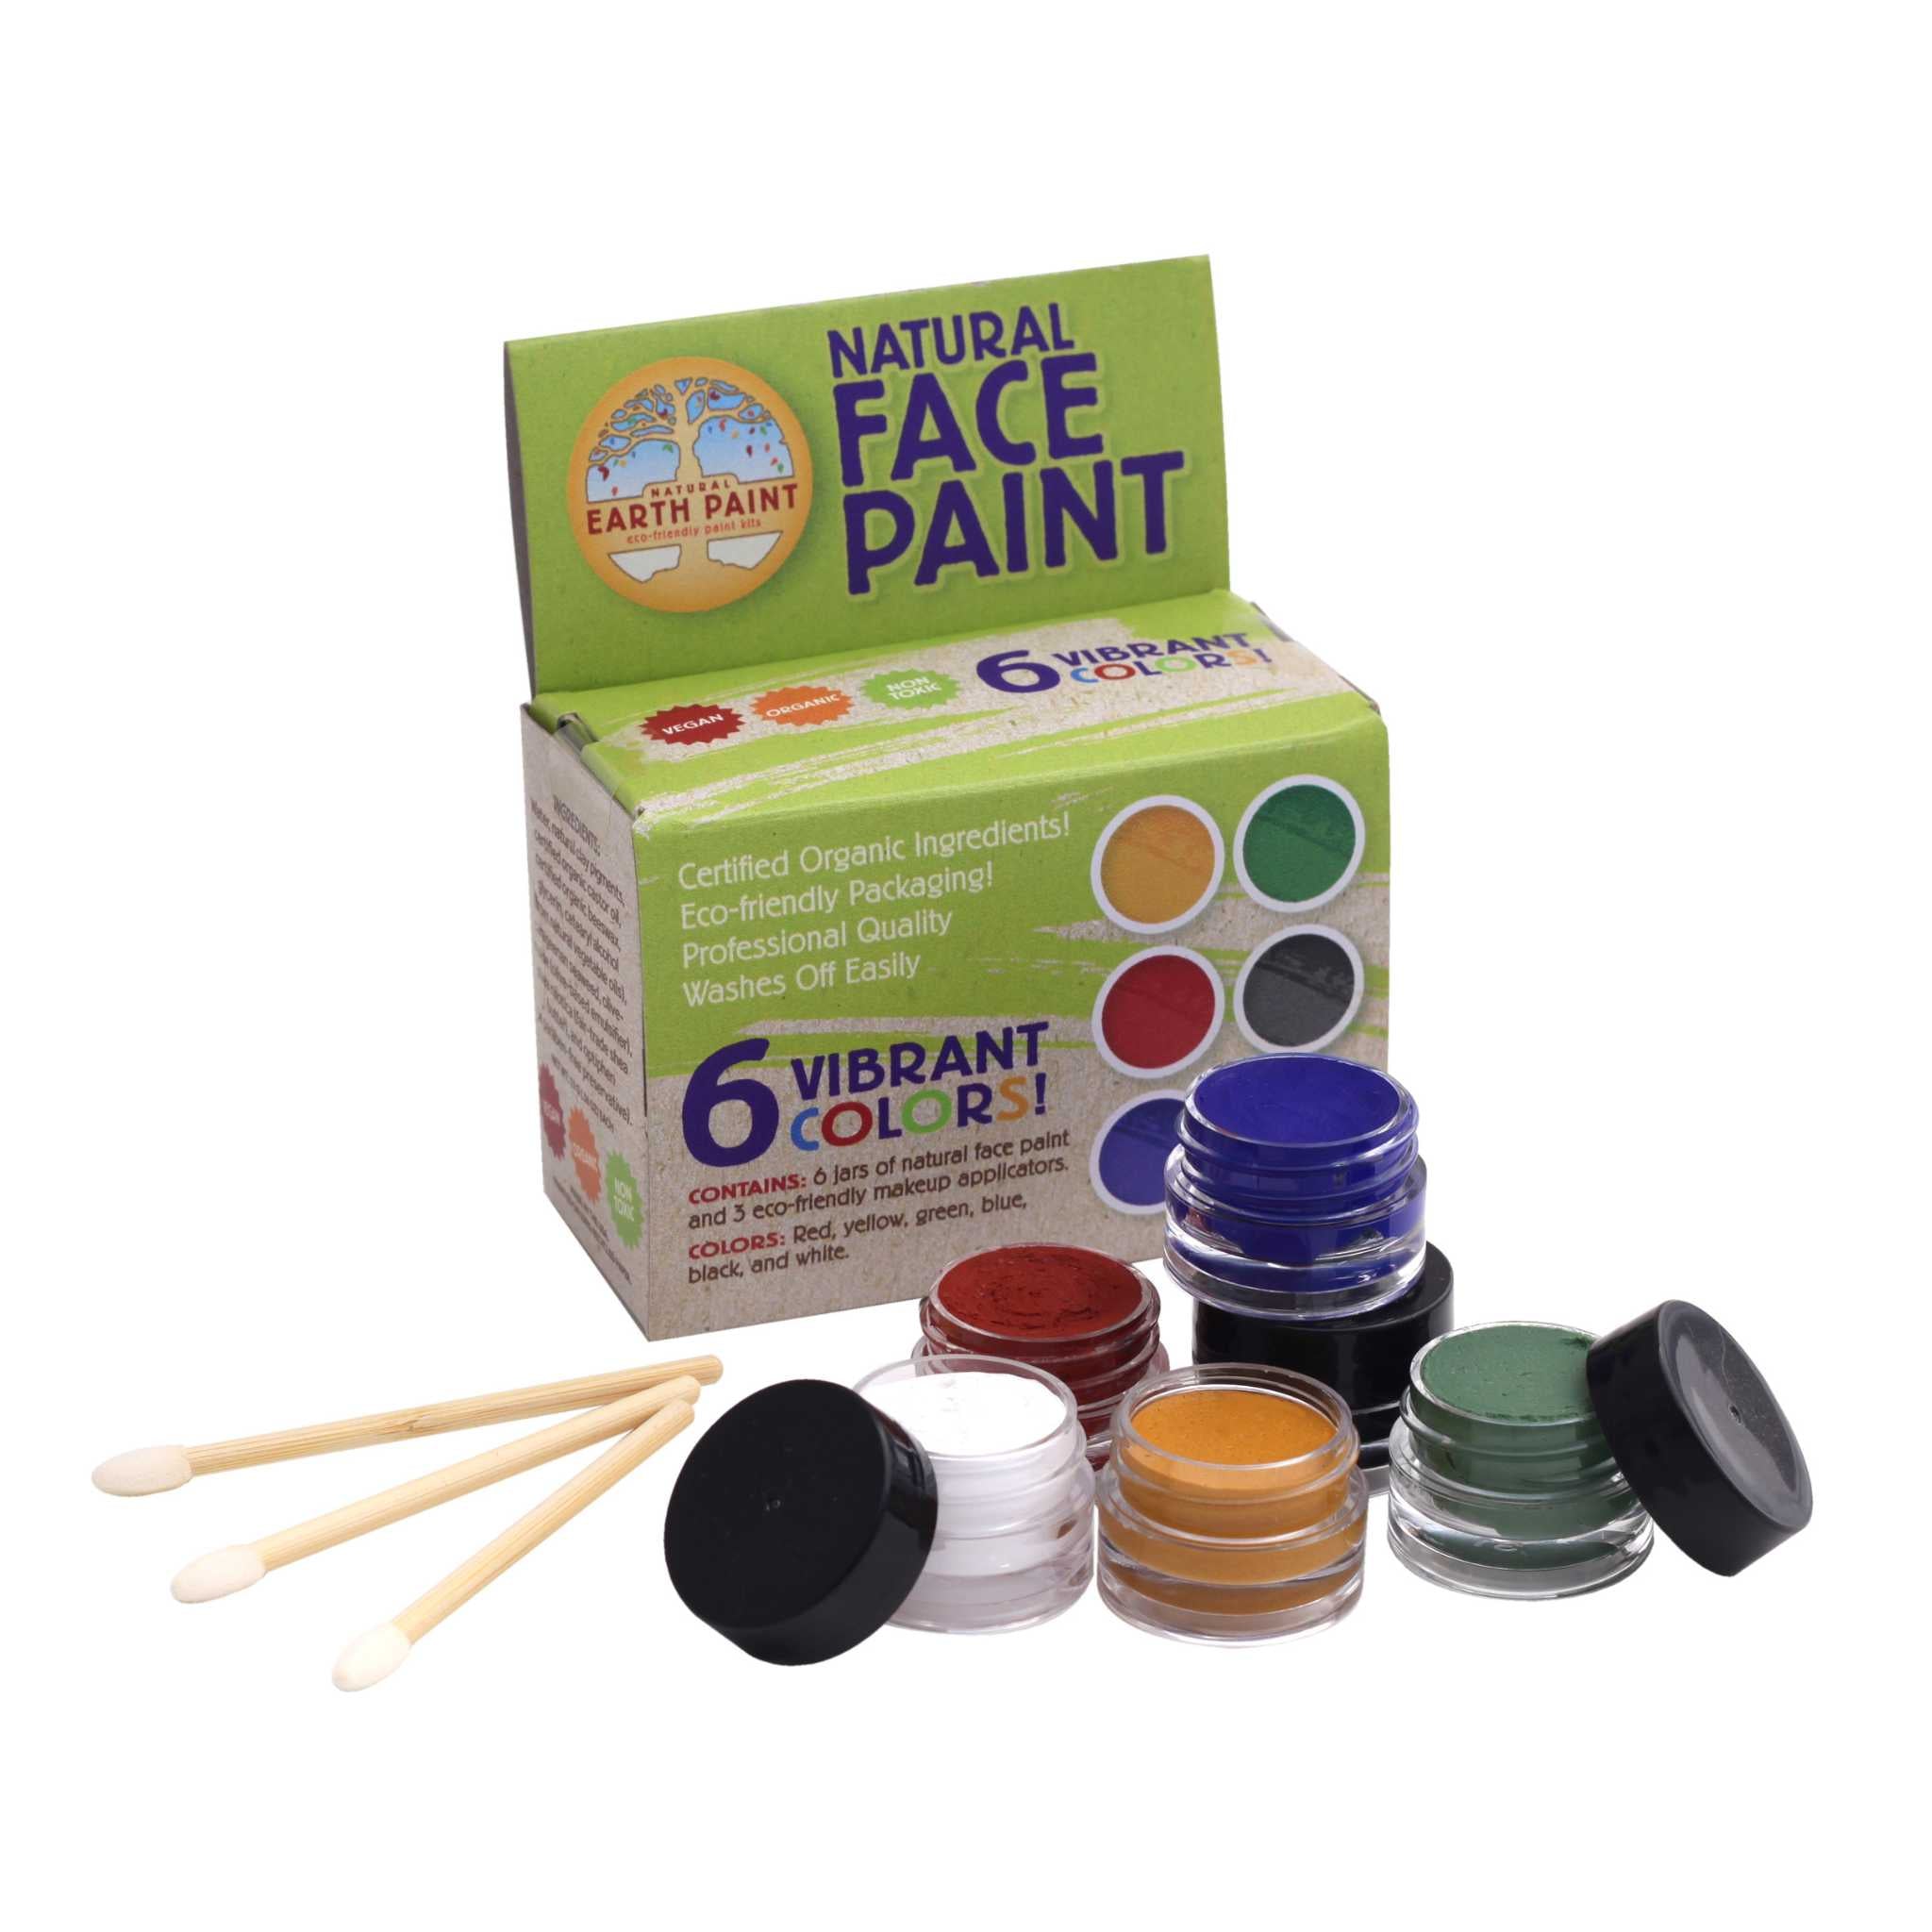 Natural Earth Natural Face Paint - 6 Pack - Showing Packaging, Jars & Brushes